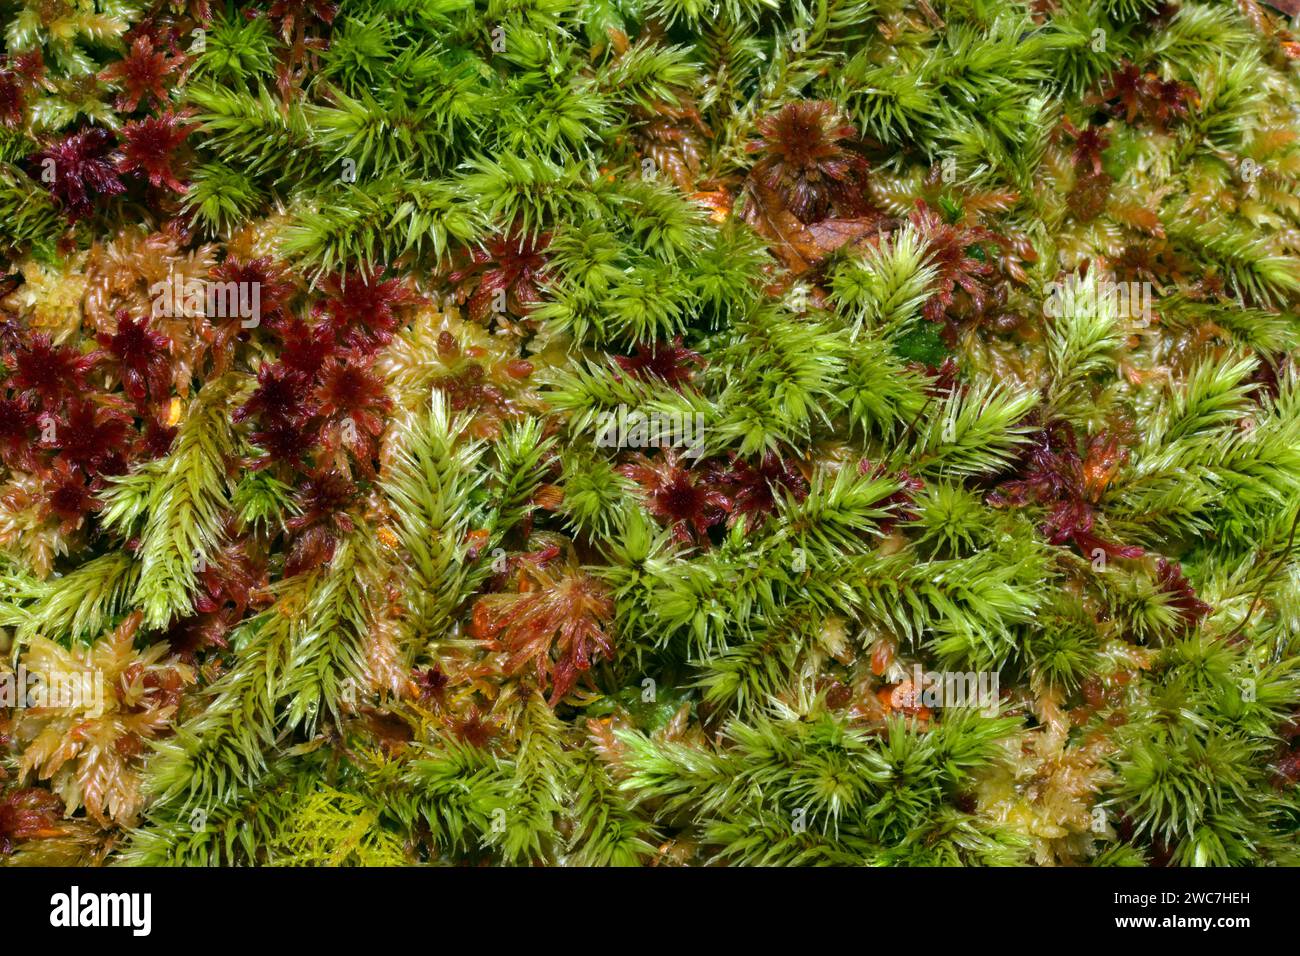 Here the moss Aulacomnium palustre is growing amongst Sphagnum moss. Aulacomnium palustre has virtually a worldwide distribution. Stock Photo